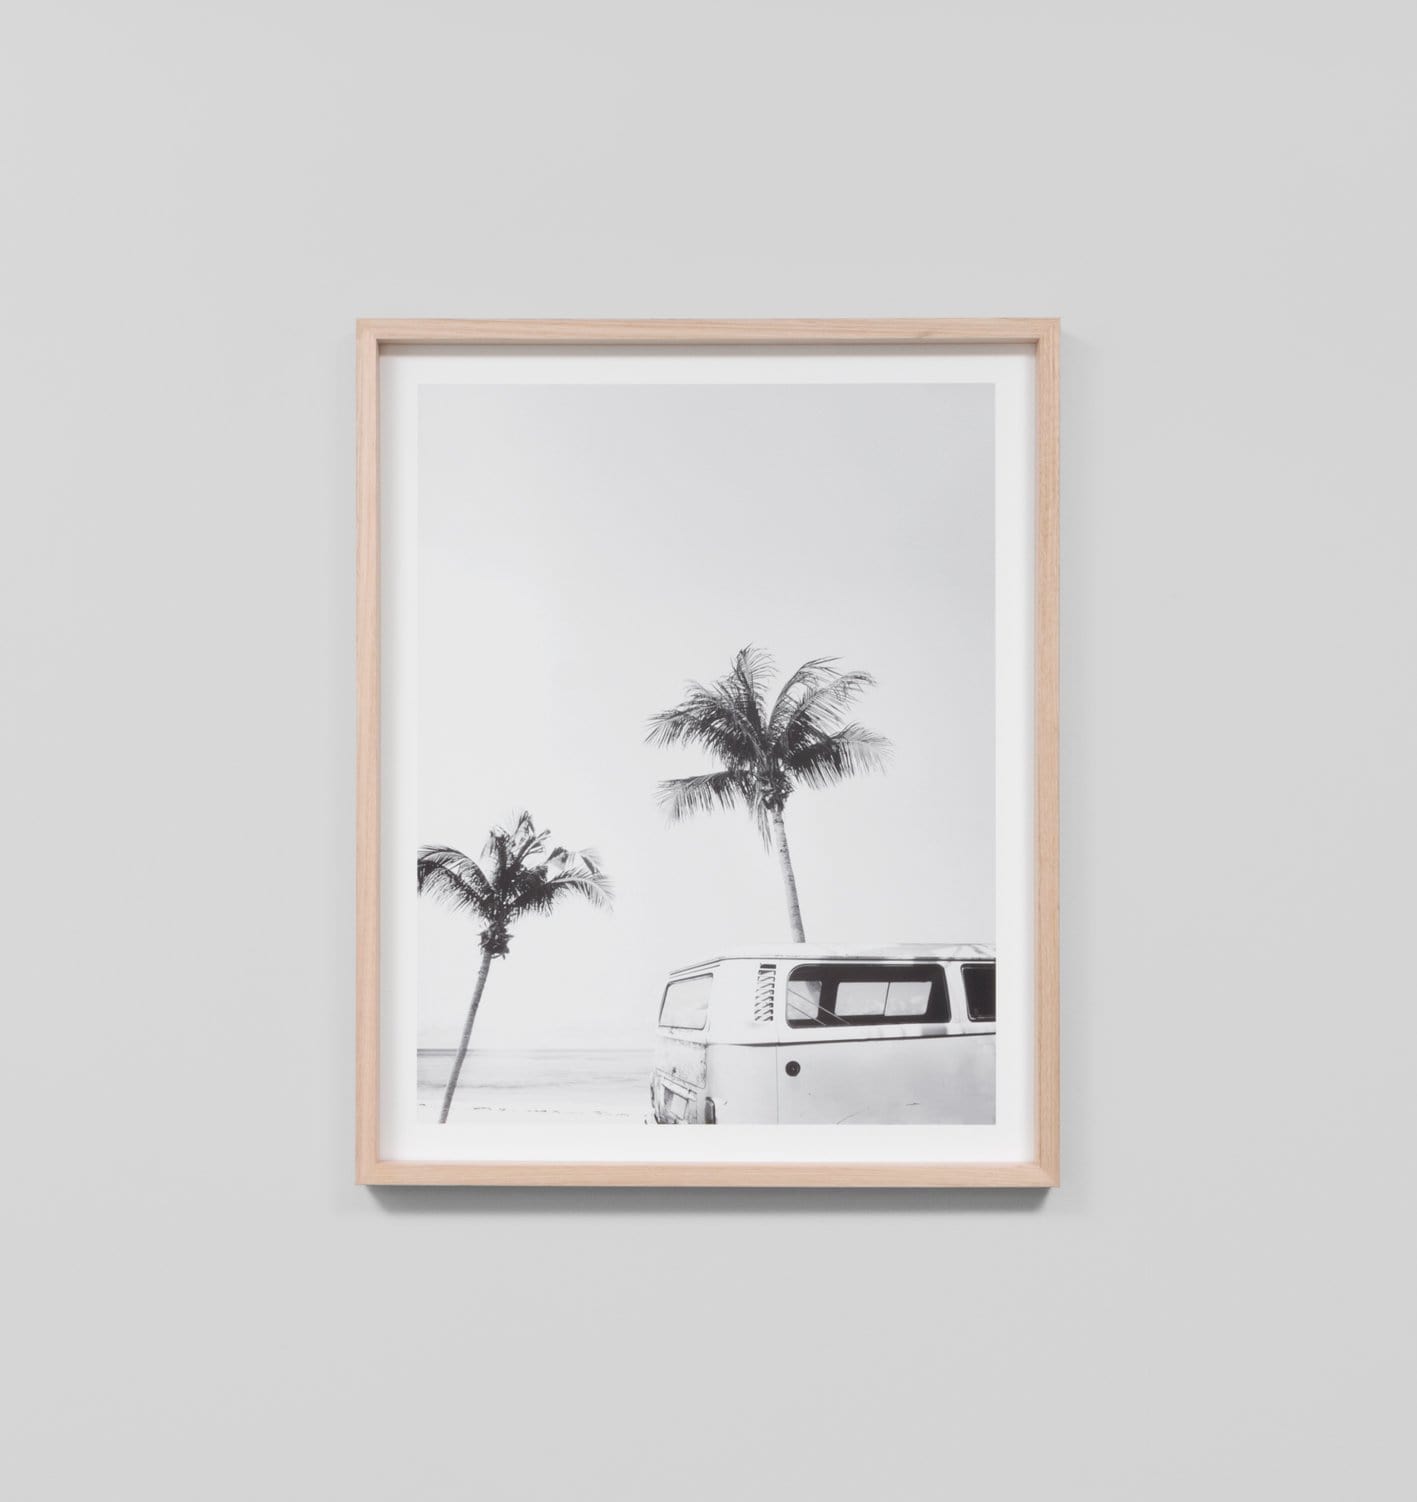 Buy Surf Trip Print online at - Sofas Direct